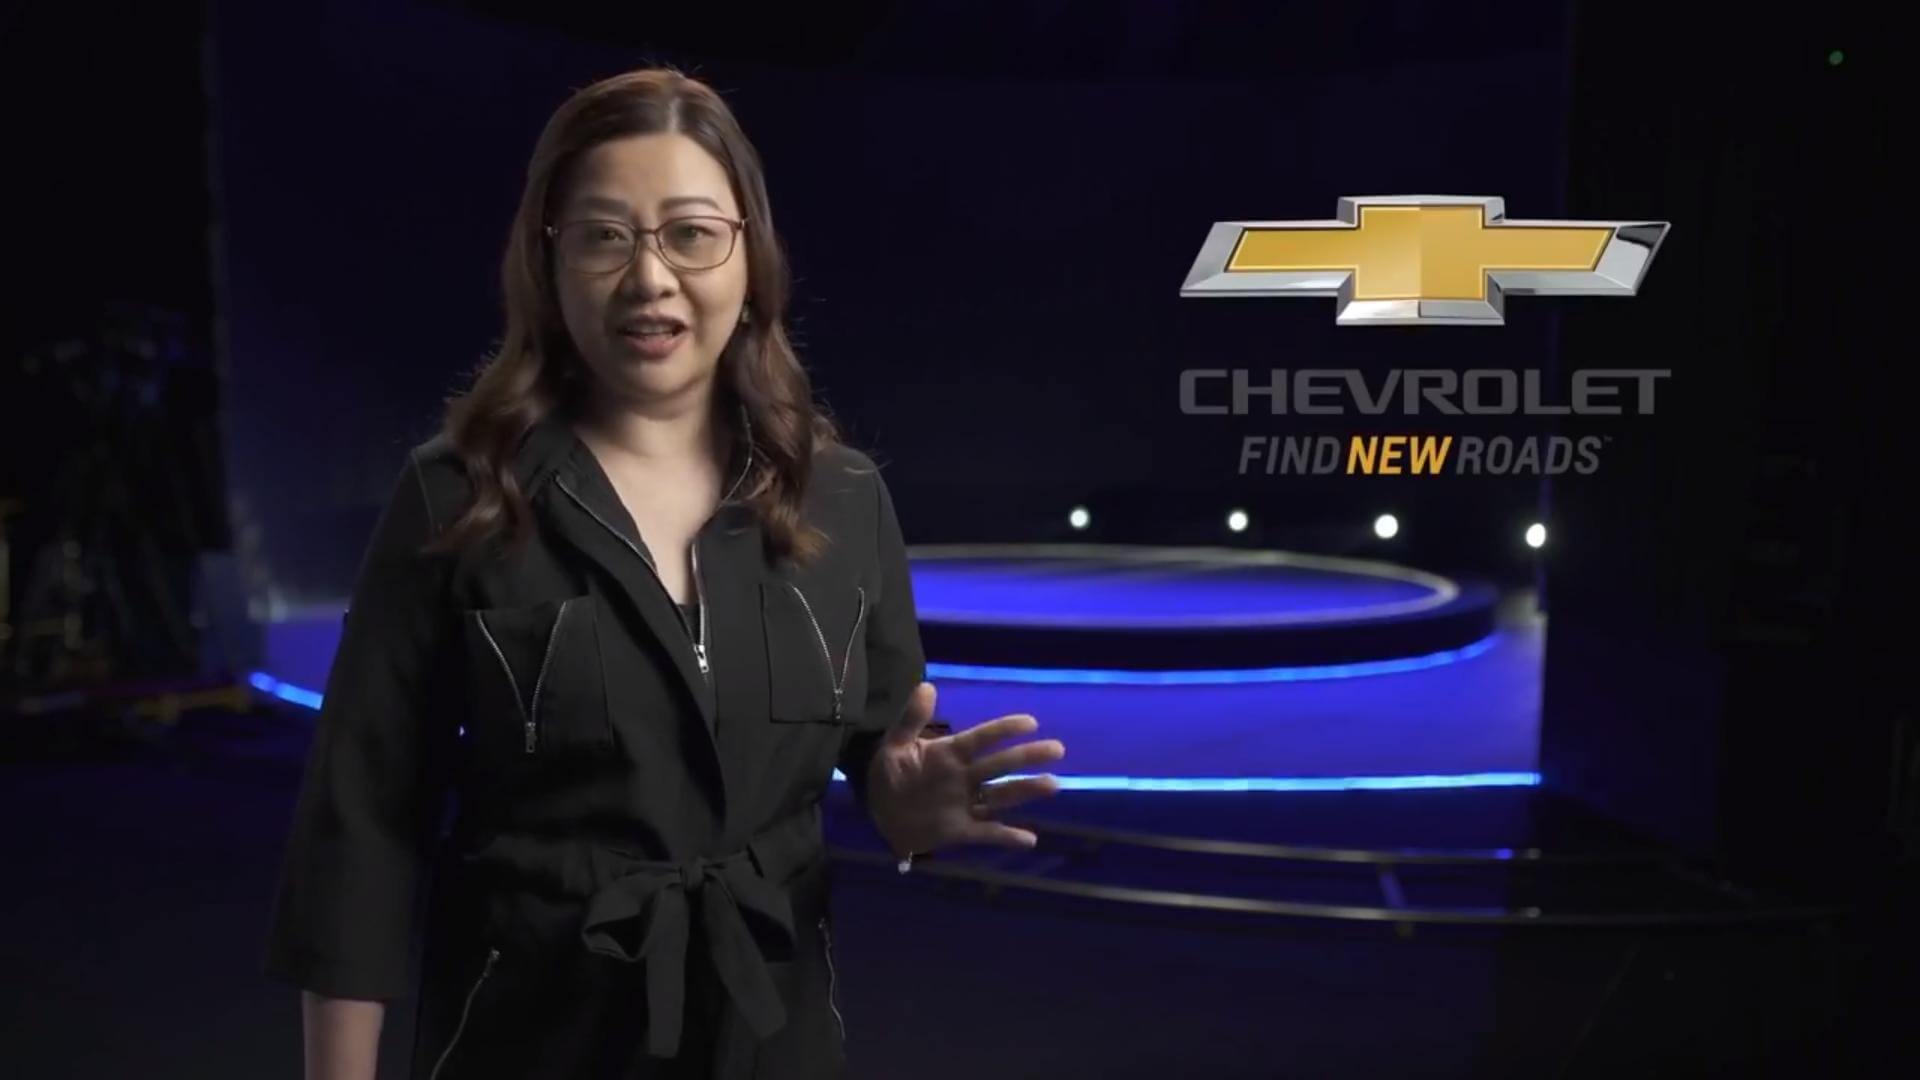 vivo Defines Smooth Navigation of New Normal in its X50 Series Launch with Chevrolet